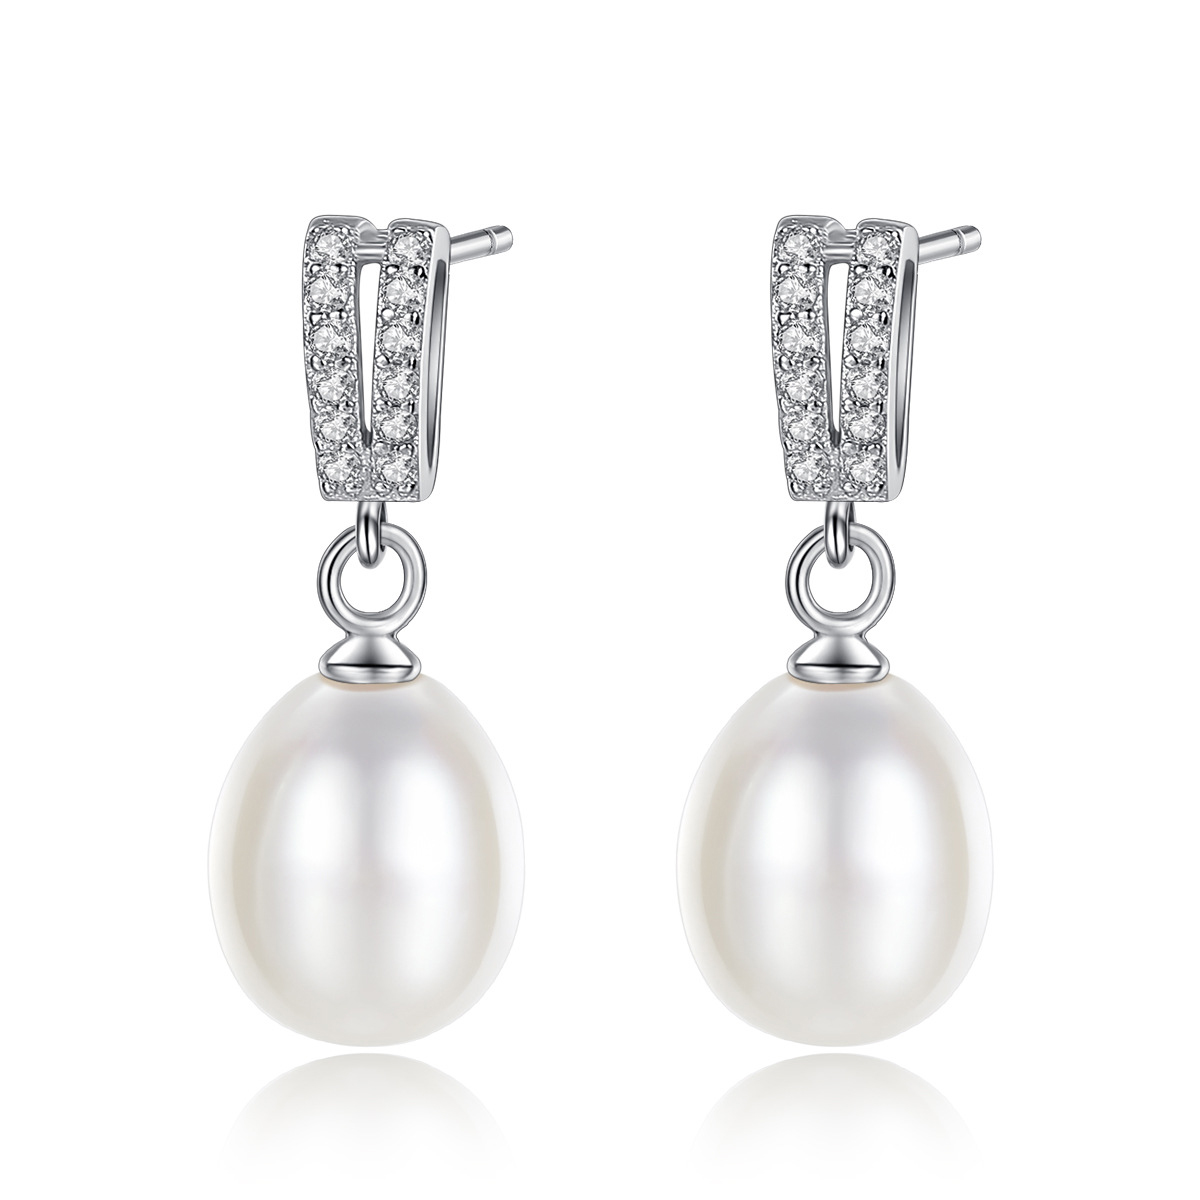 3a Cz Freshwater Pearl Sterling Silver Ear Nails